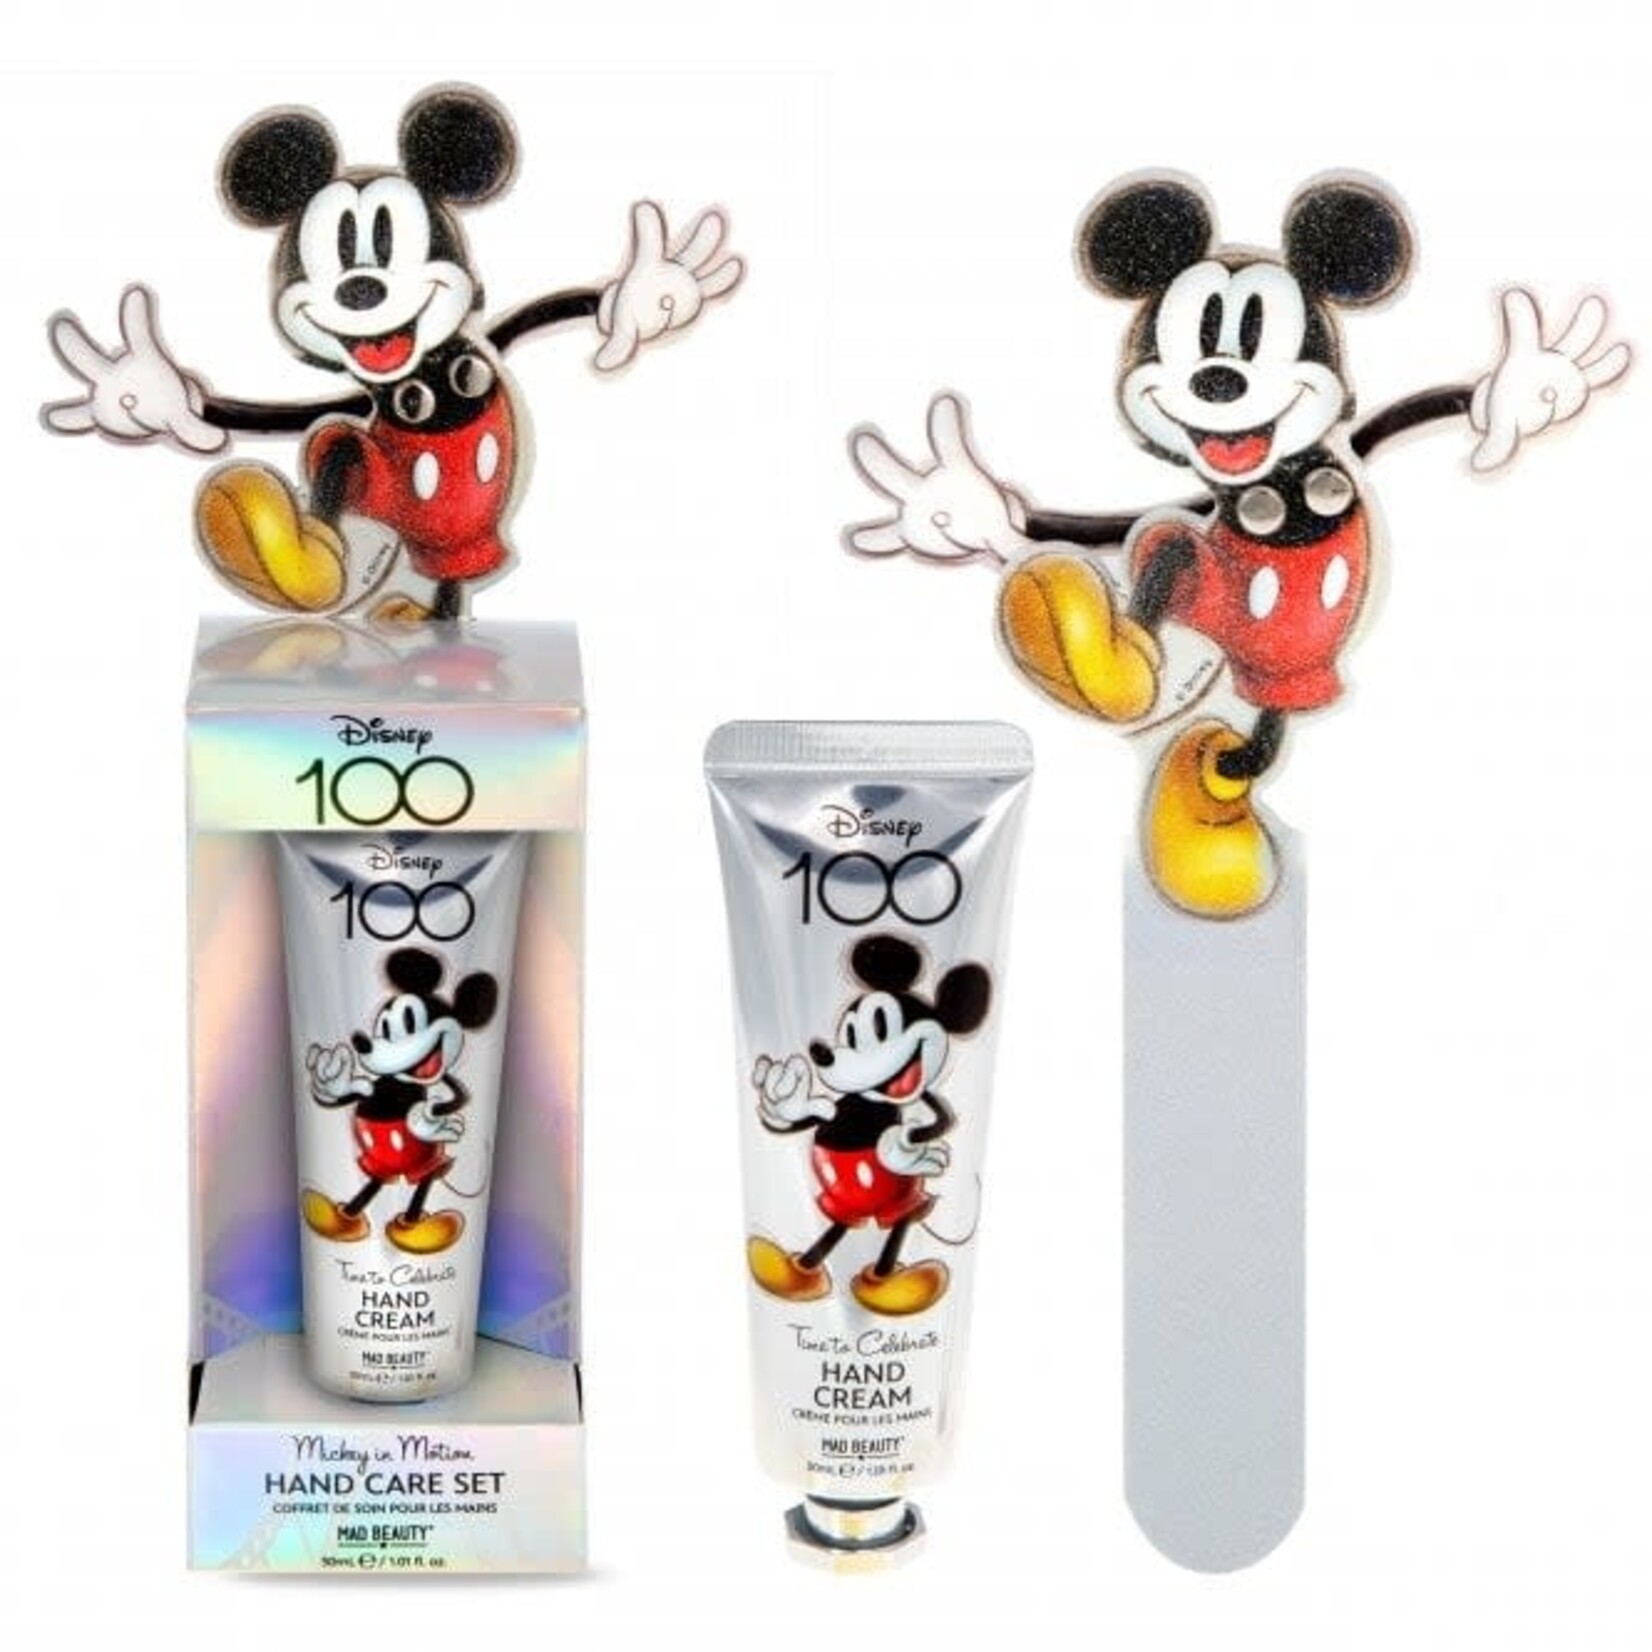 MICKEY MOUSE HAND CARE SET